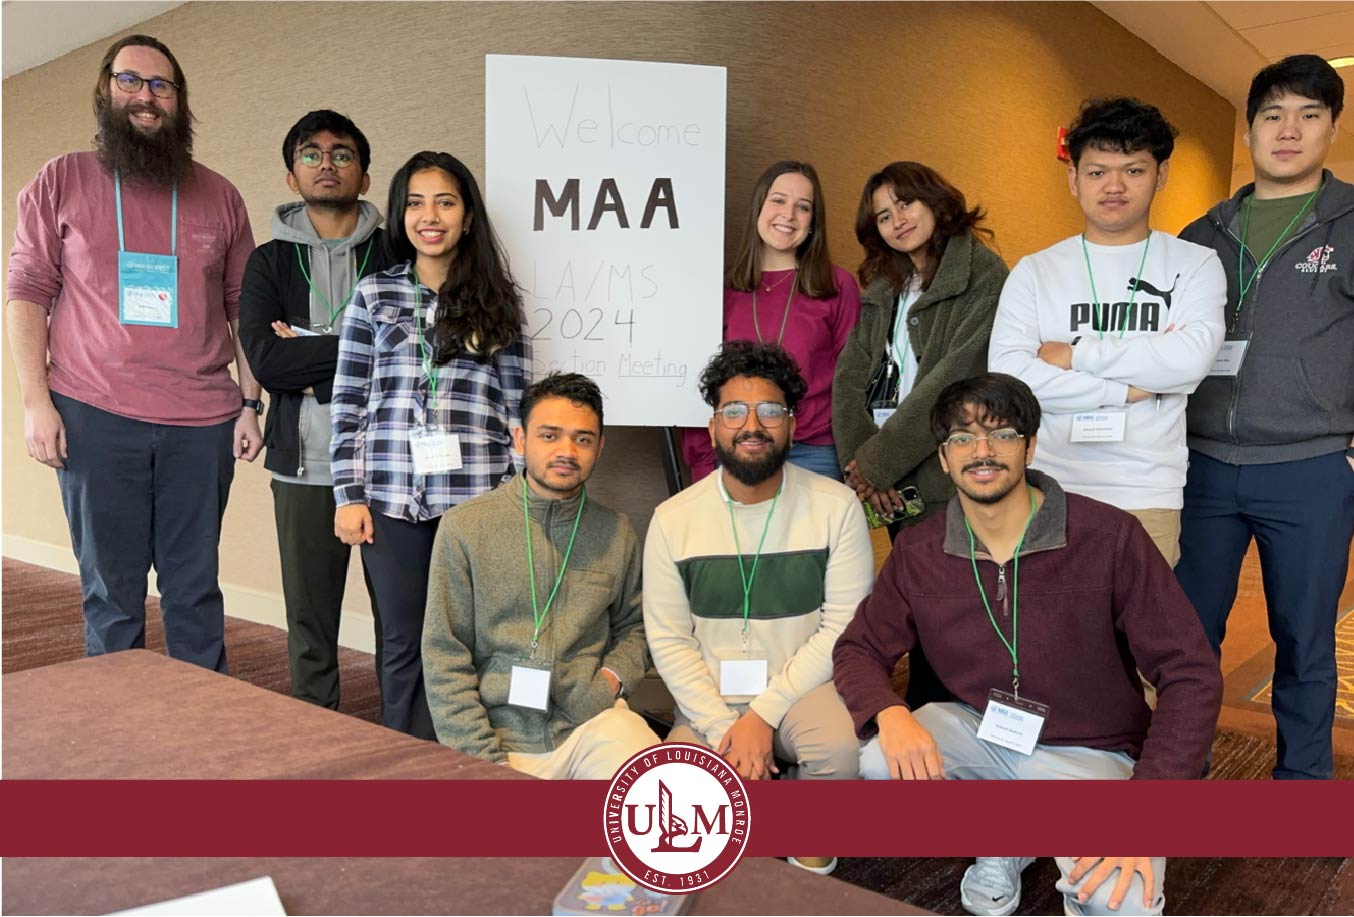  Math students attend annual meeting and competition